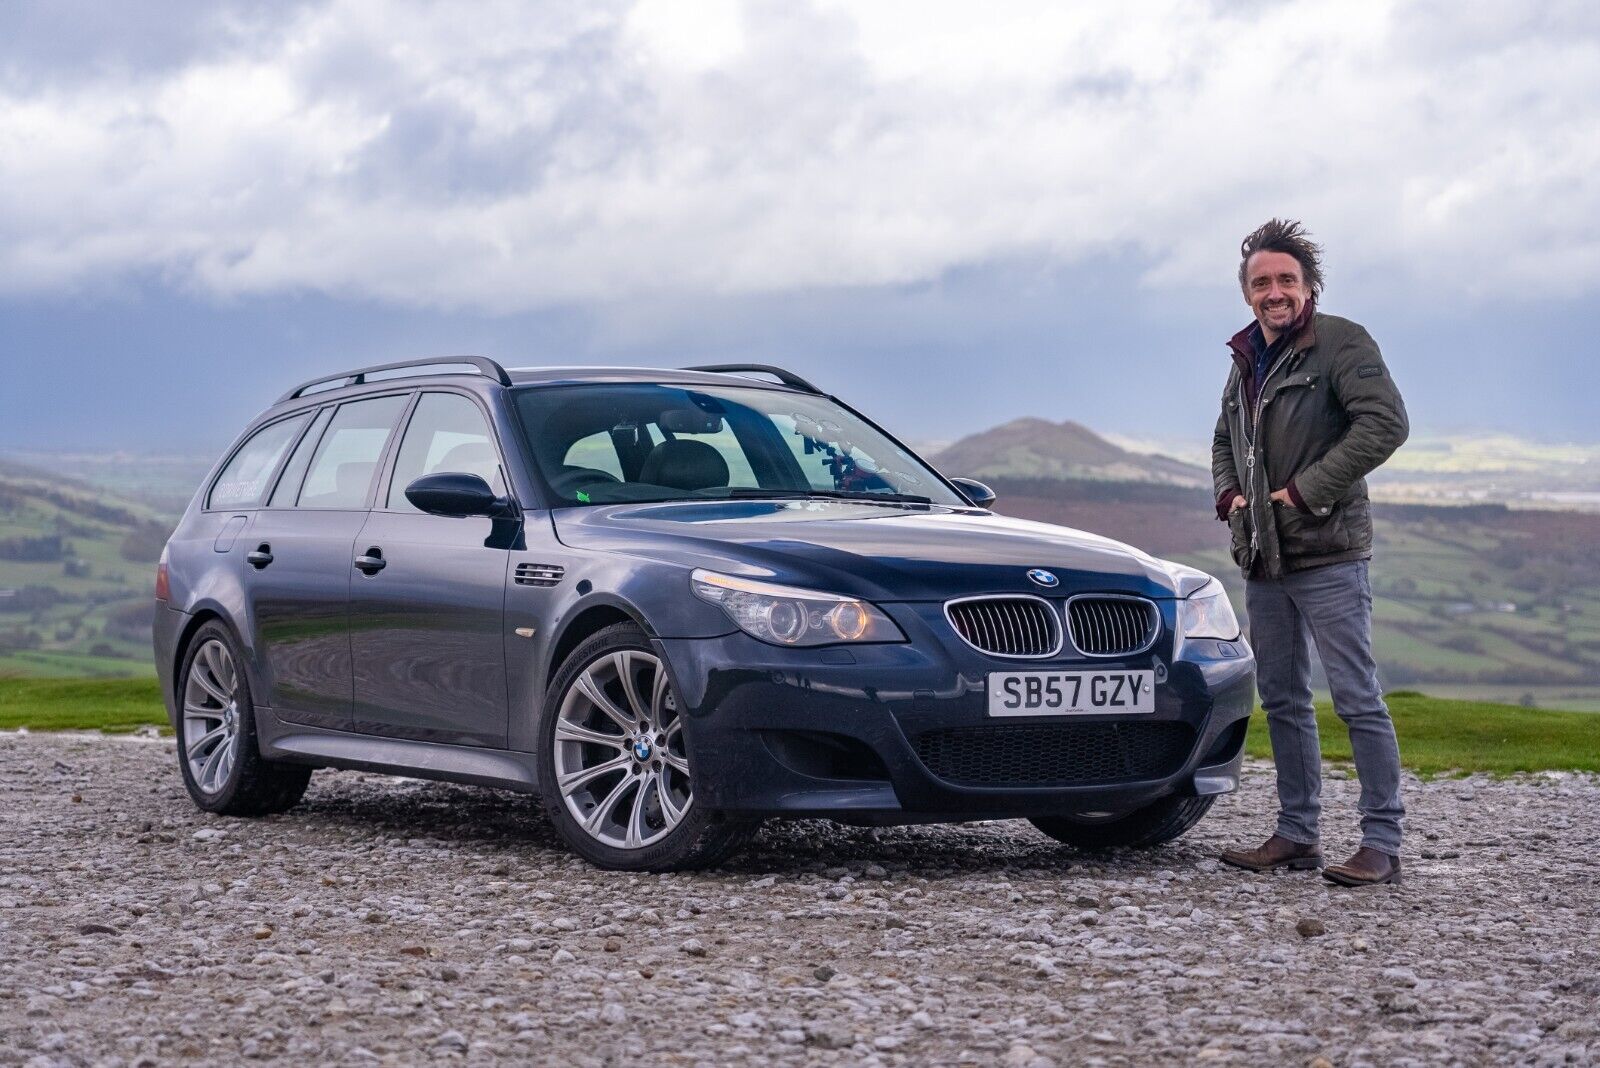 A BMW E61 M5 Touring With A Six-Speed Manual Swap Is A Near Perfect Wagon